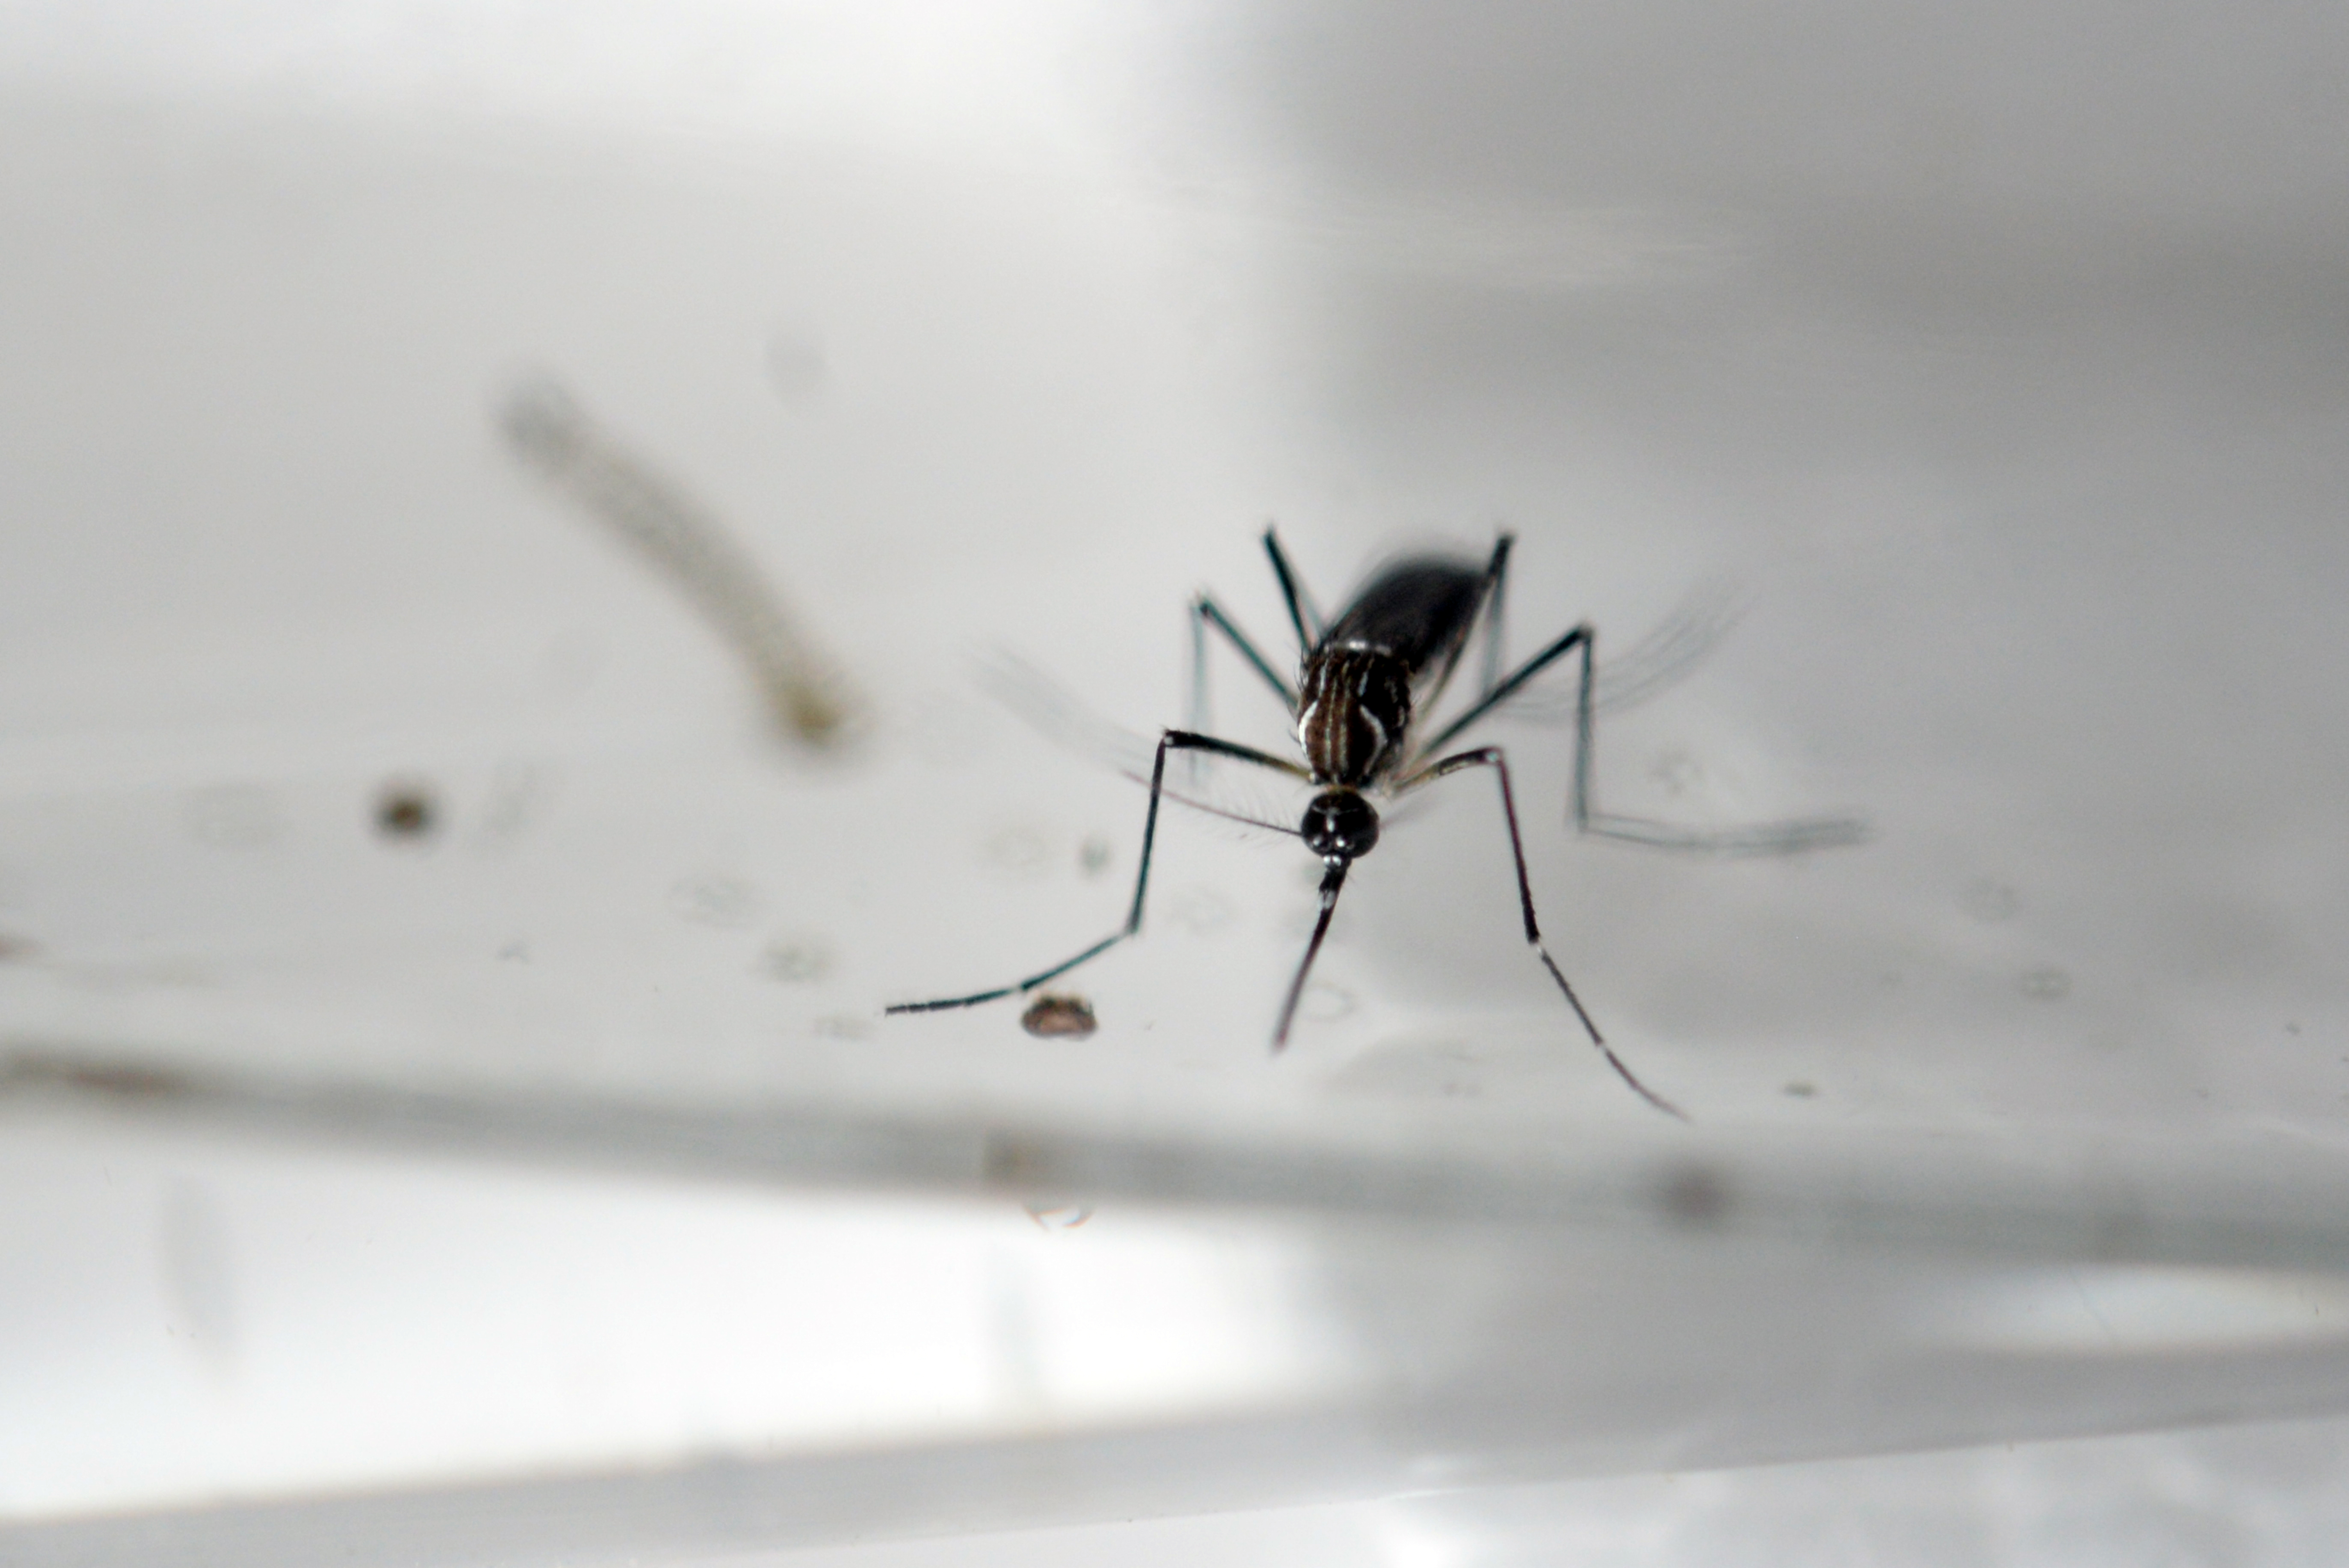 (FILES) This file photo taken on January 27, 2016 shows an Aedes Aegypti mosquito being photographed in a laboratory of control of epidemiological vectors in San Salvador. European scientists announced on June 23, 2016 they had discovered antibodies which attack Zika, a step they hope will pave the way for a protective vaccine against the brain-damaging virus. The antibodies -- frontline soldiers in the immune system -- "efficiently neutralise" Zika in human cells in lab dishes, and are also effective against its cousin virus dengue, the team reported. / AFP PHOTO / MARVIN RECINOS